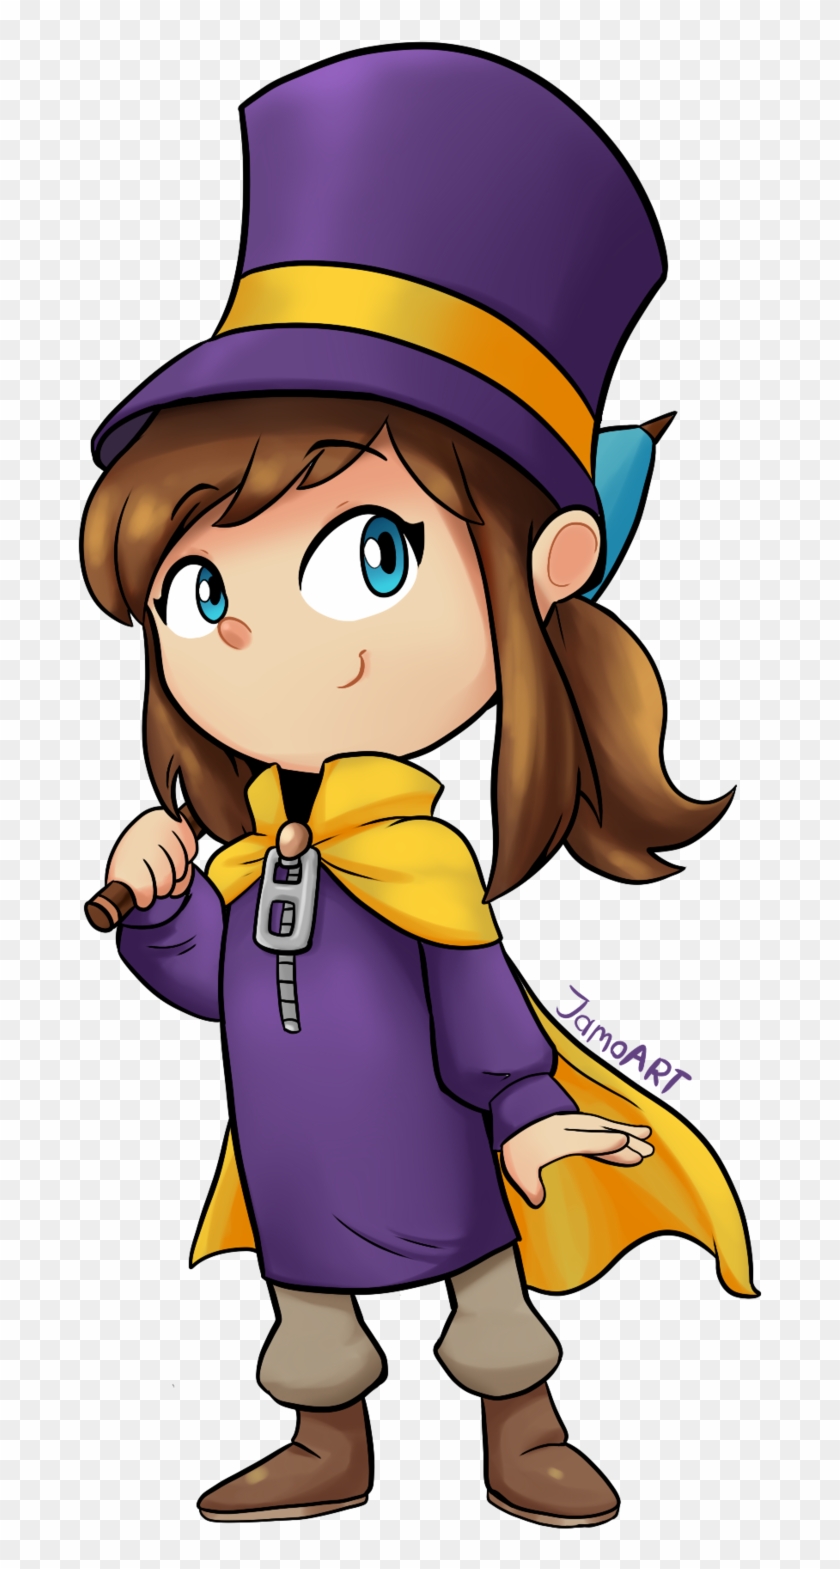 Hat Kid - Hat In A Time #260256